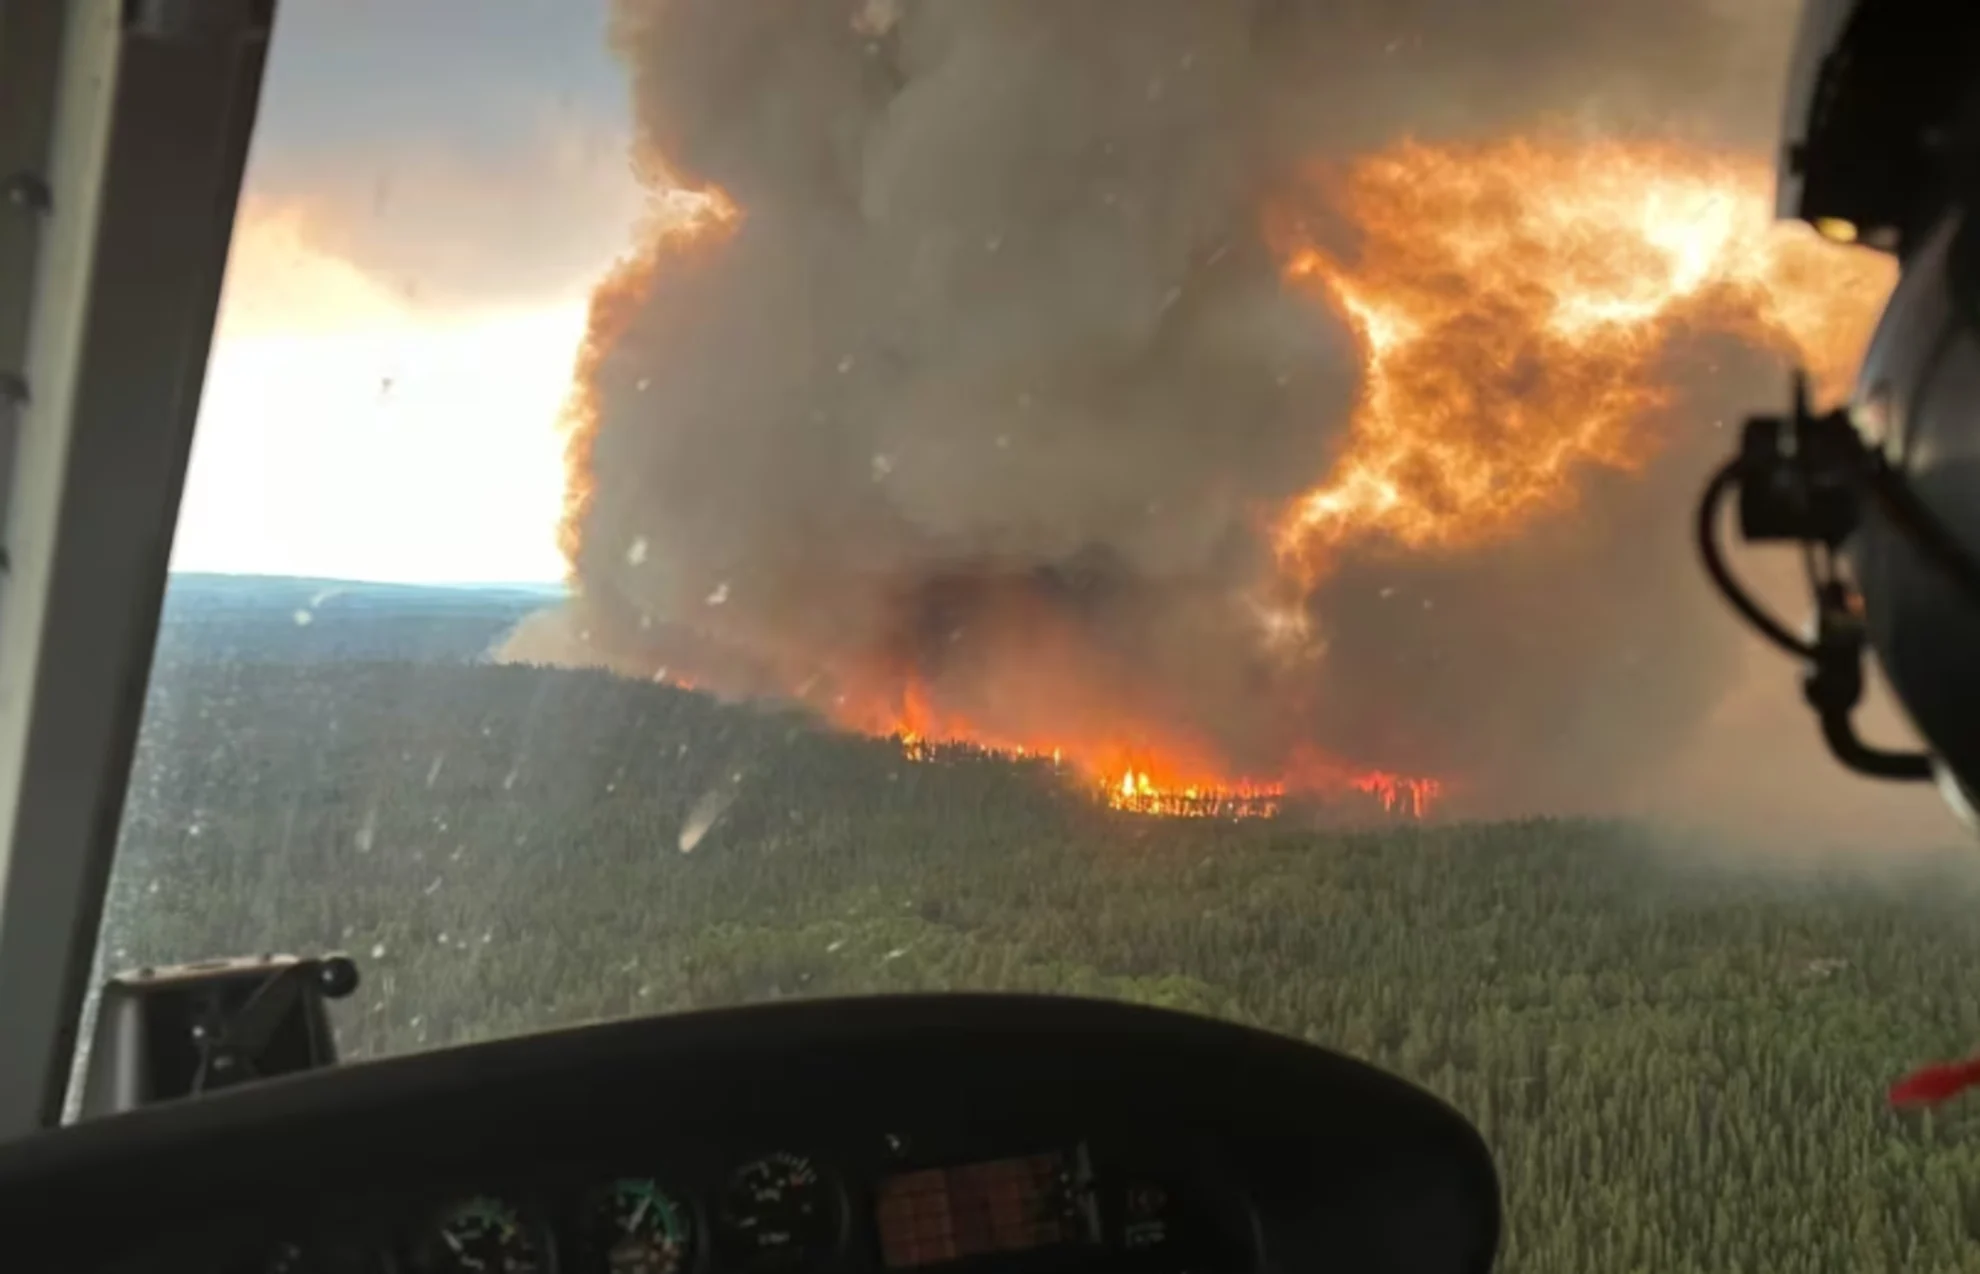 Alberta to drop state of emergency as wildfire situation improves